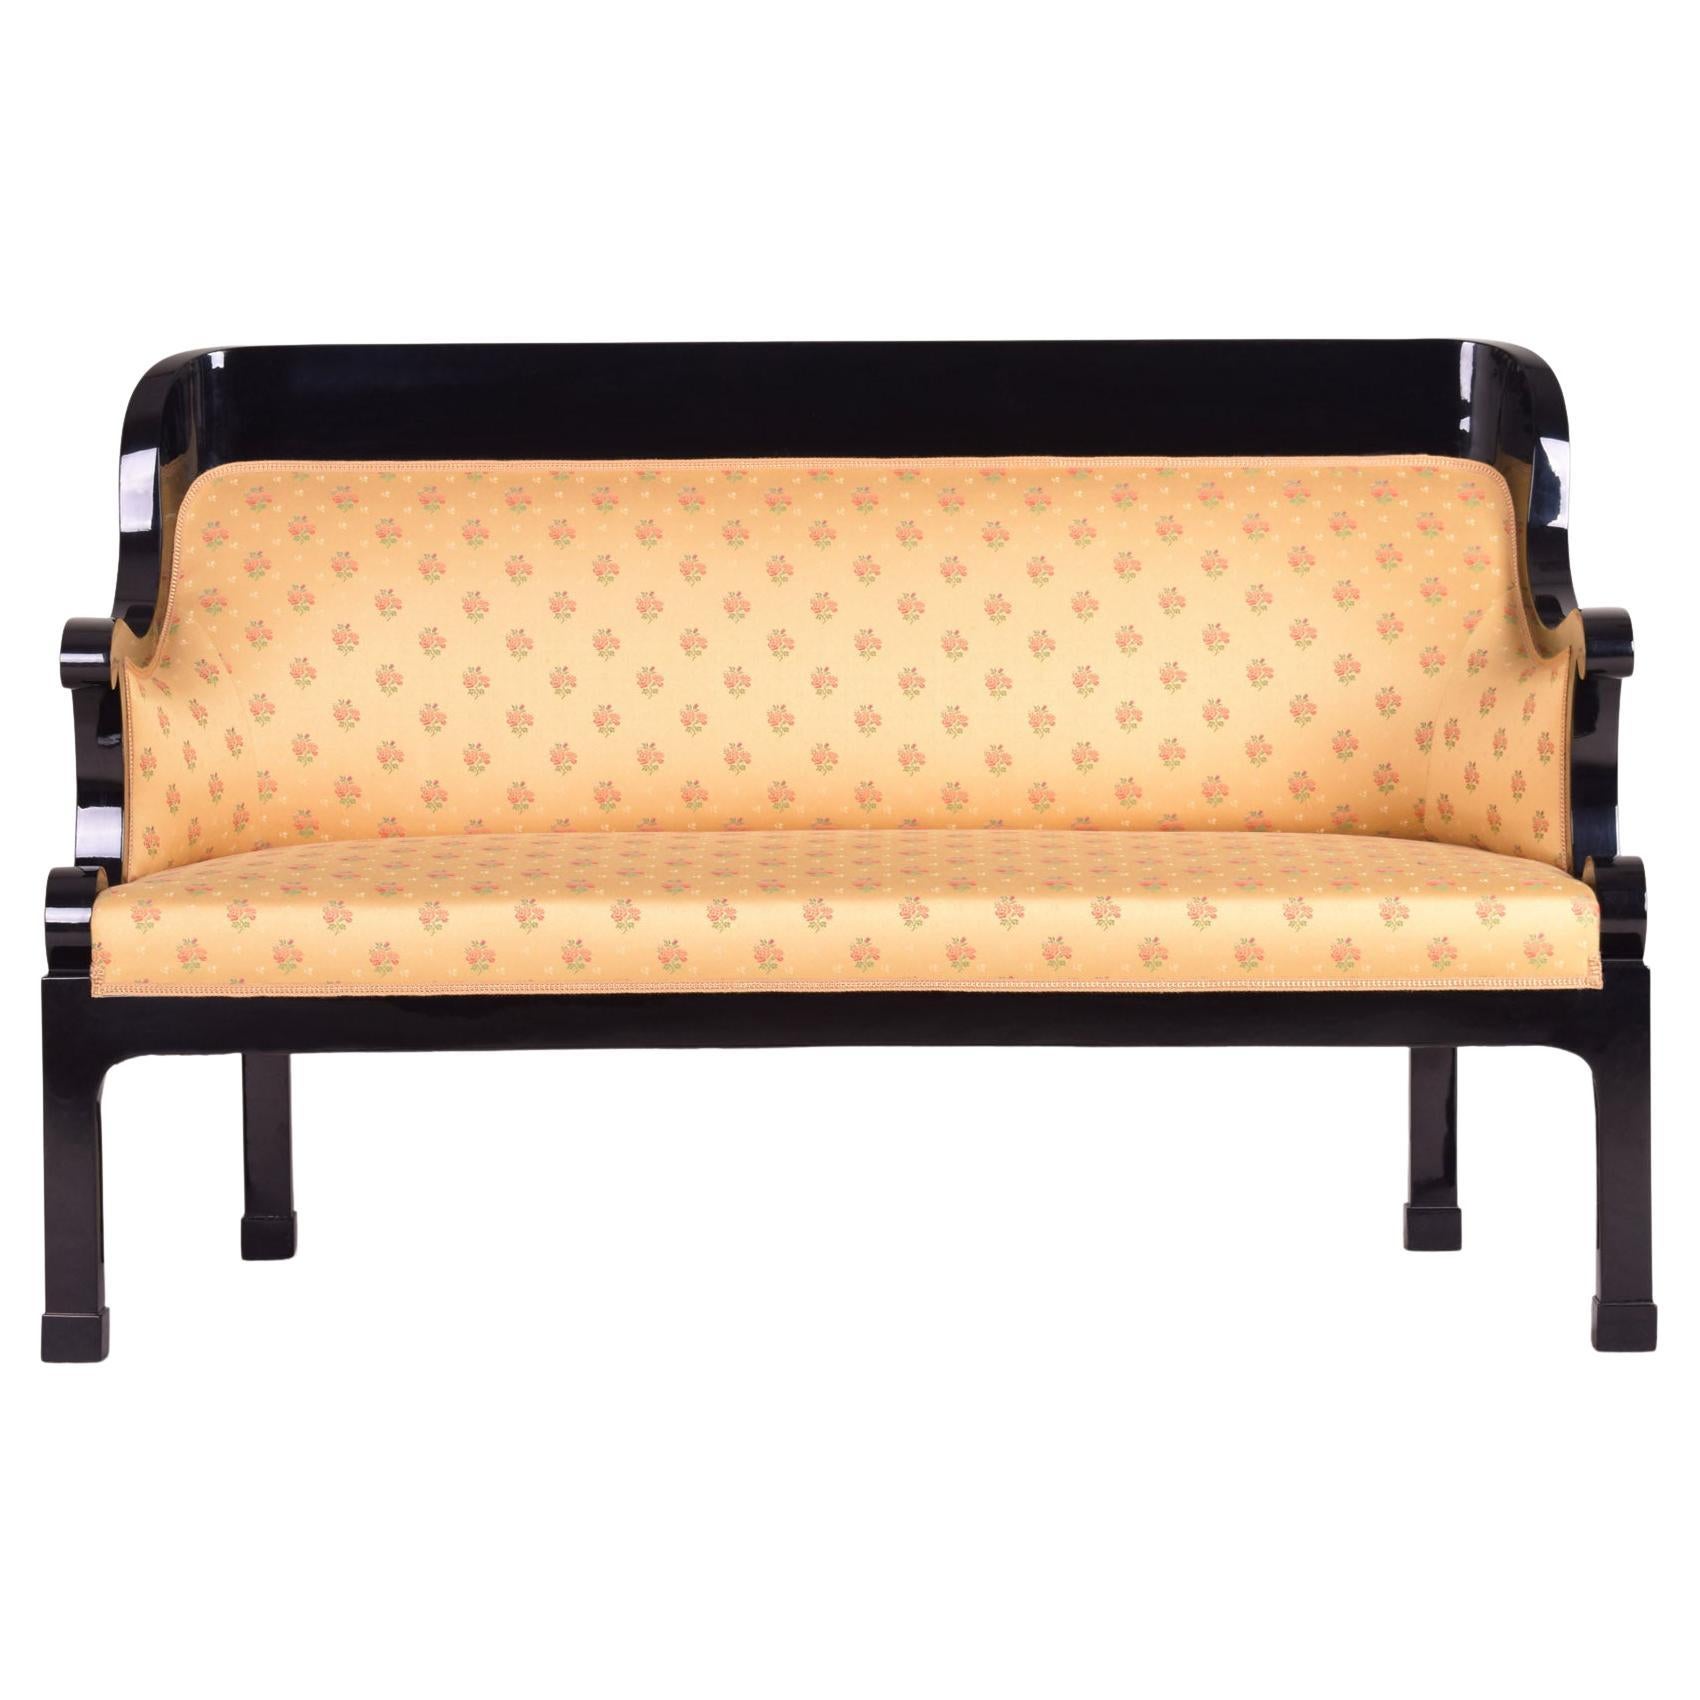 Czech Empire Sofa, Made in 1810 and Restored, Yellow and Black For Sale